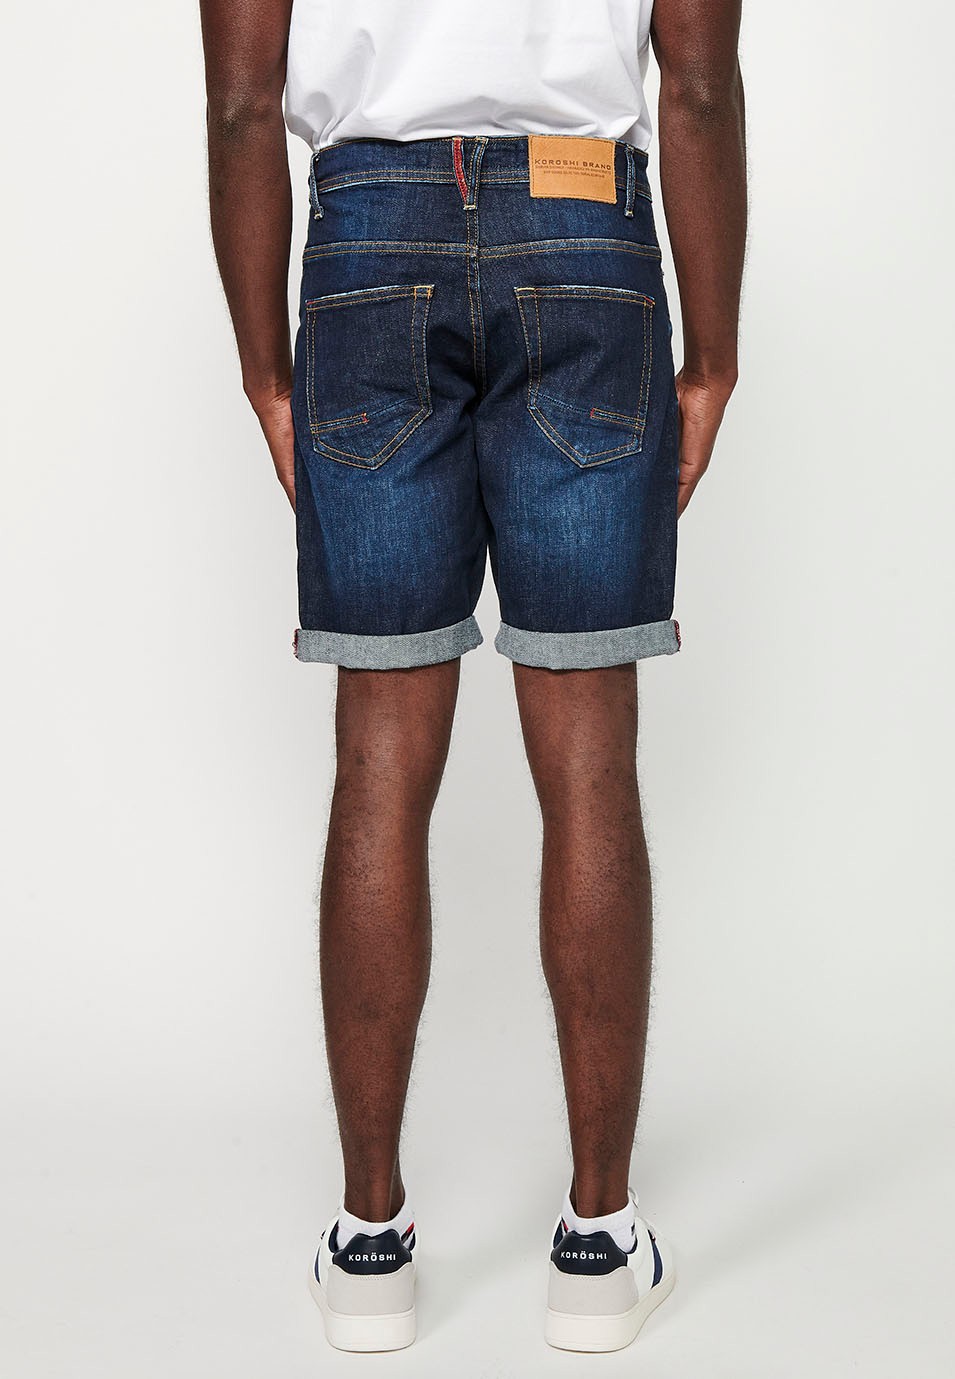 Shorts with turn-up finish and front zipper and button closure with five pockets, one blue pocket pocket for Men 7